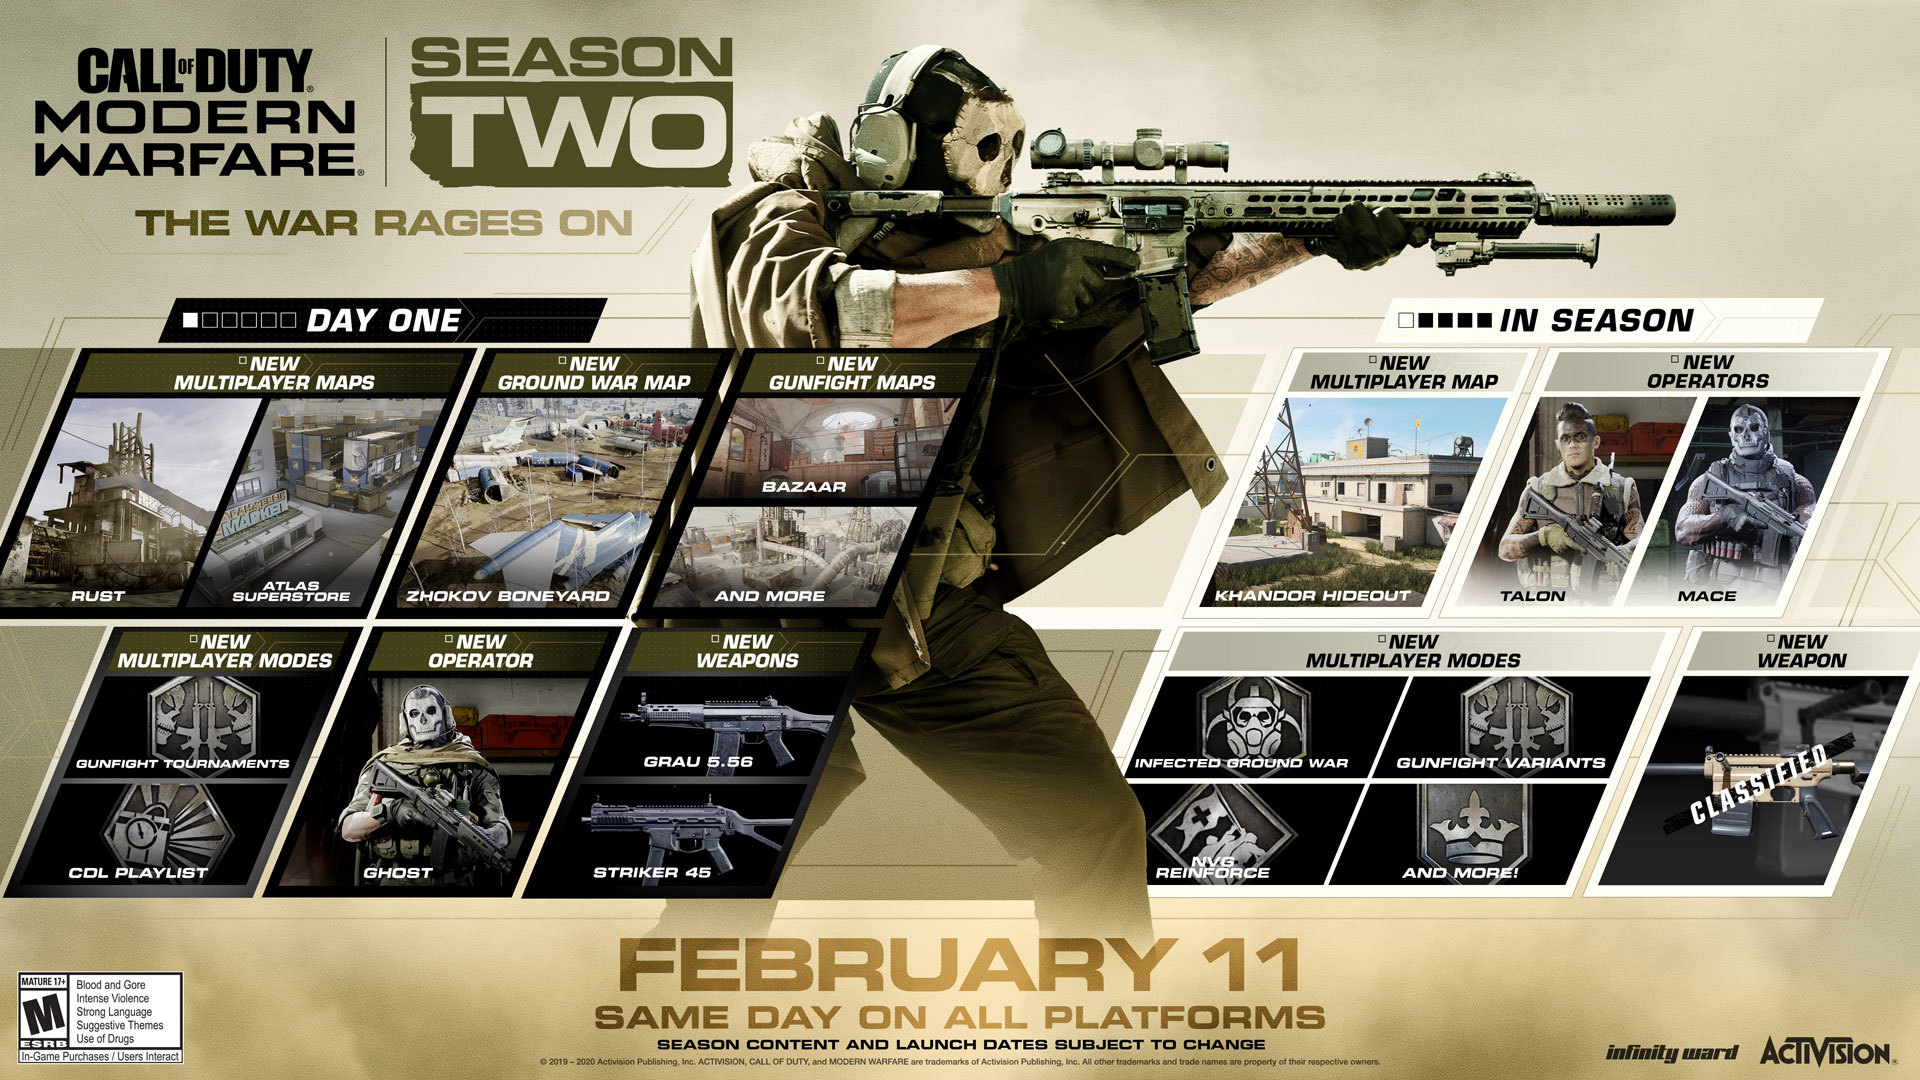 COD Vanguard February 10 Update Out Now on All Platforms for Season 2